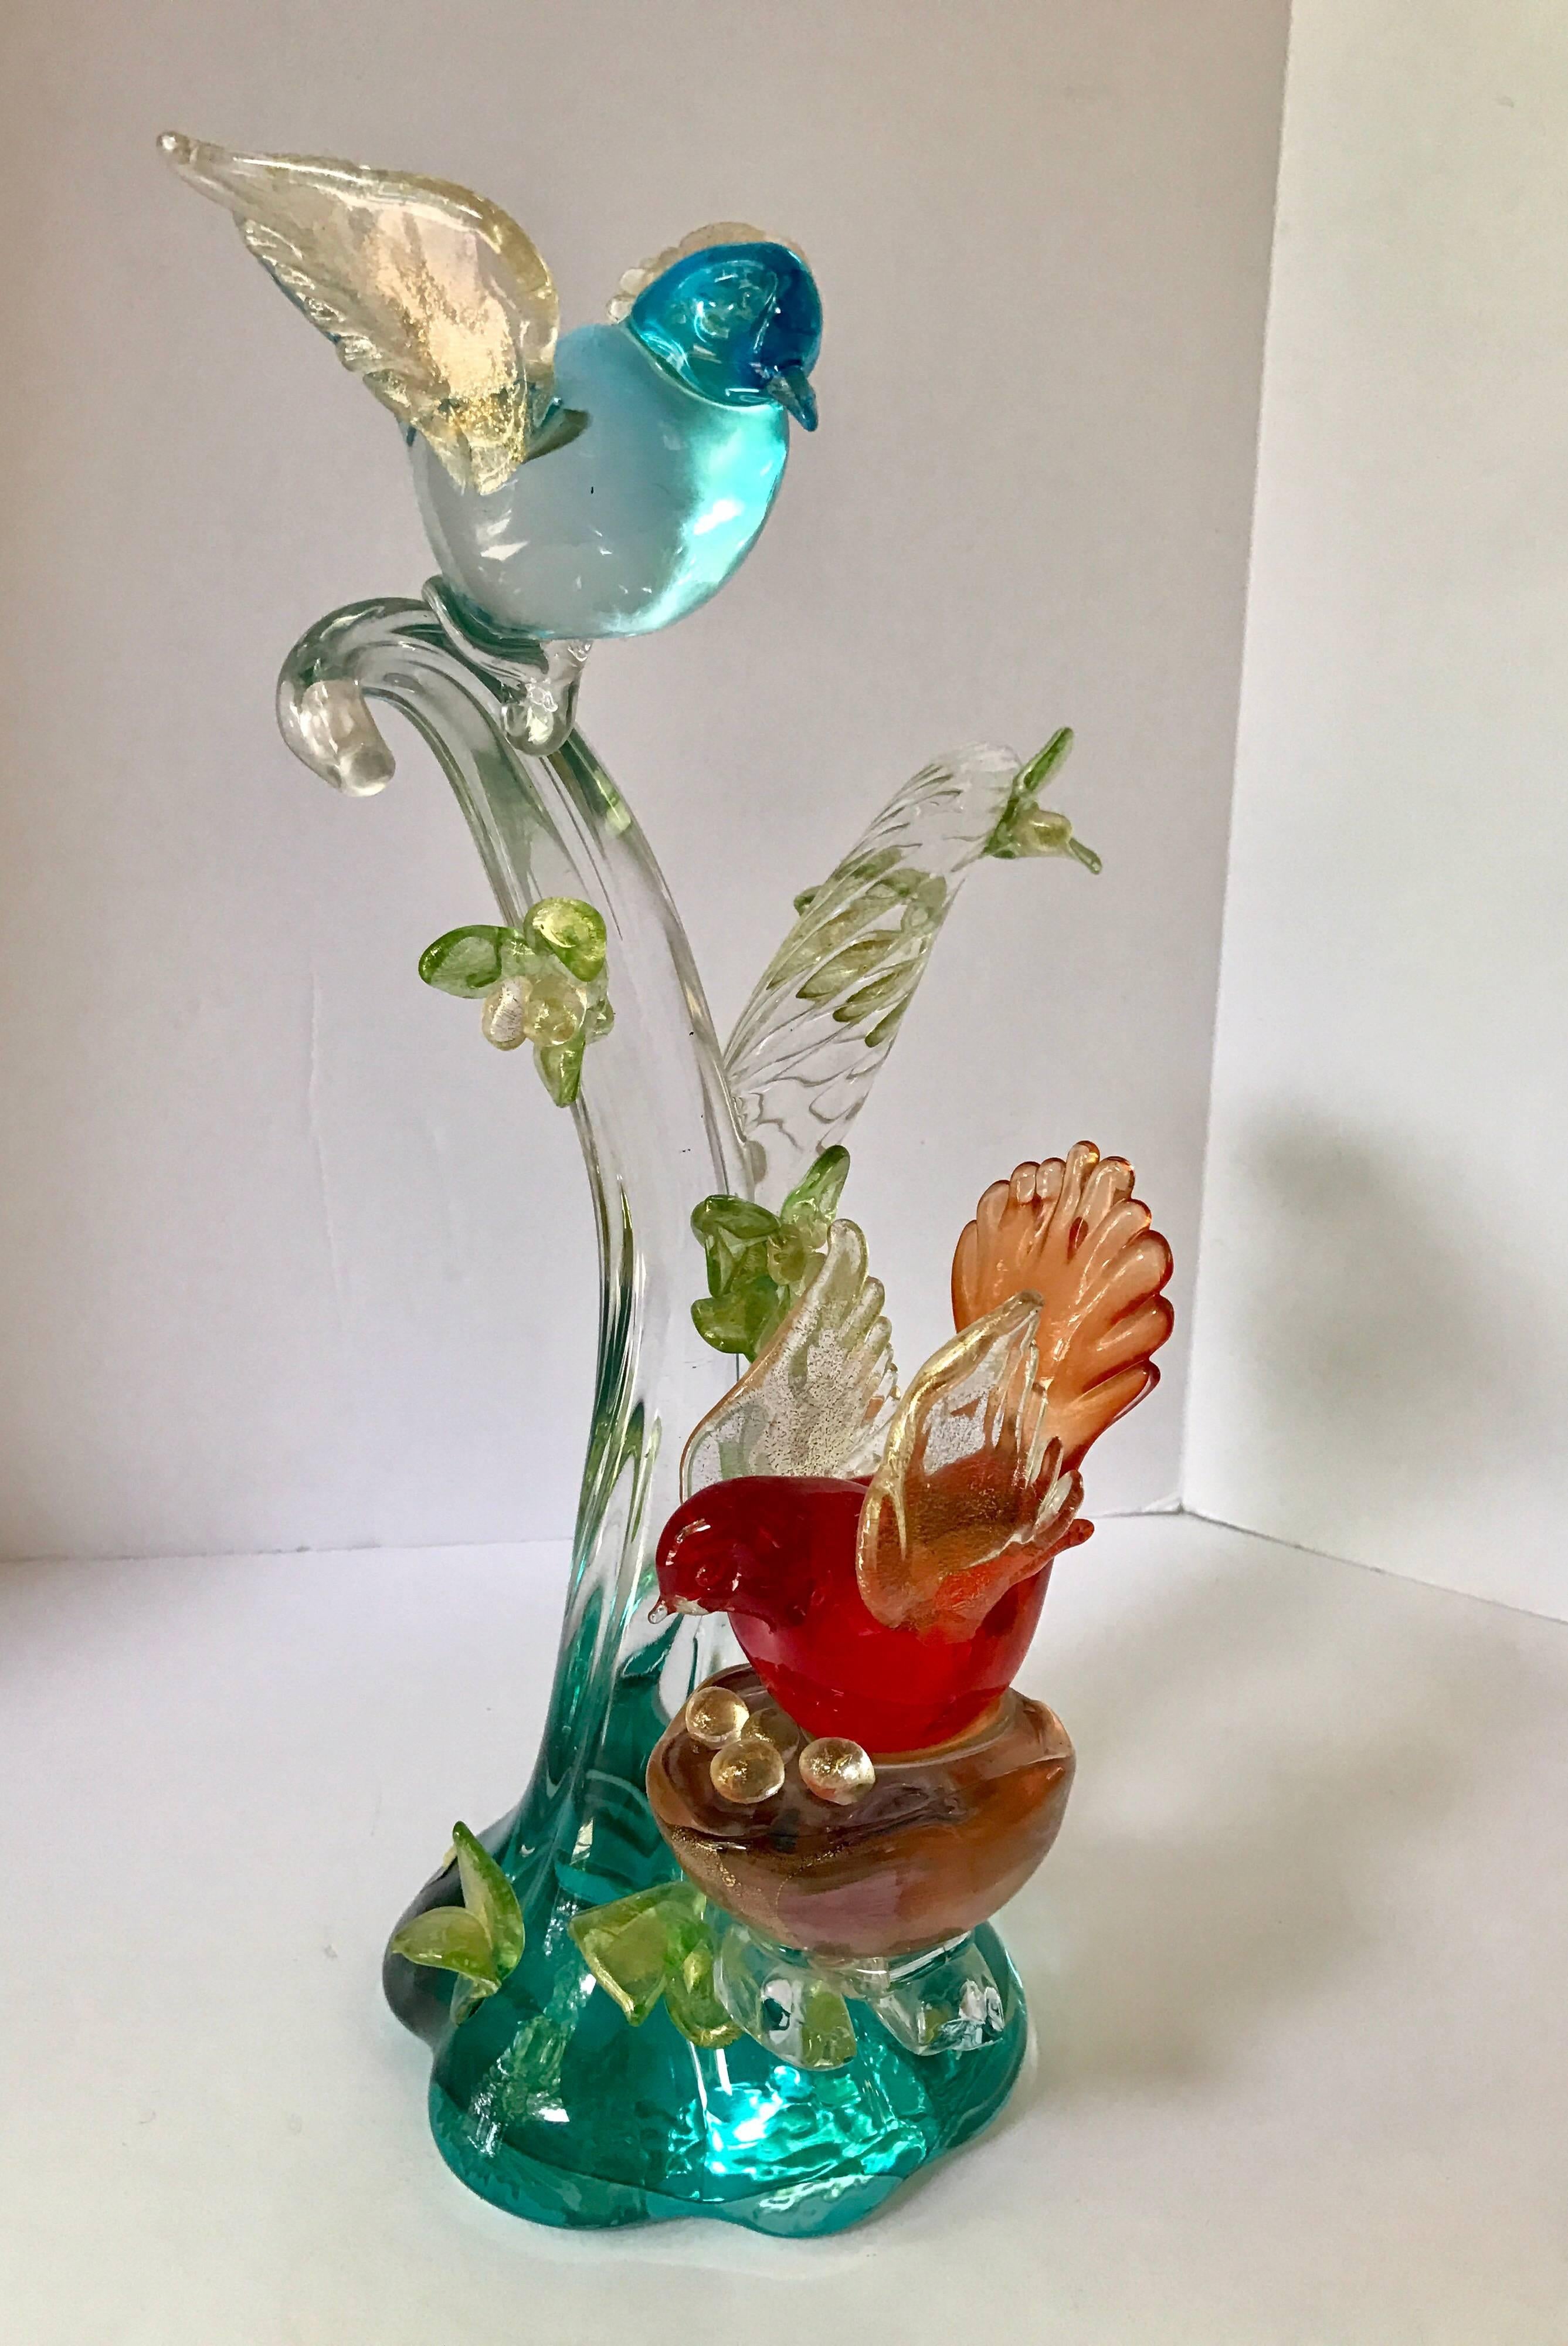 Magnificent singed Cenedese Vetri Murano glass sculpture. The colors are vibrant to say the least and include greens, blues, red, gold and turquoise. Weight is 25 pounds and it is from the early 1970s.